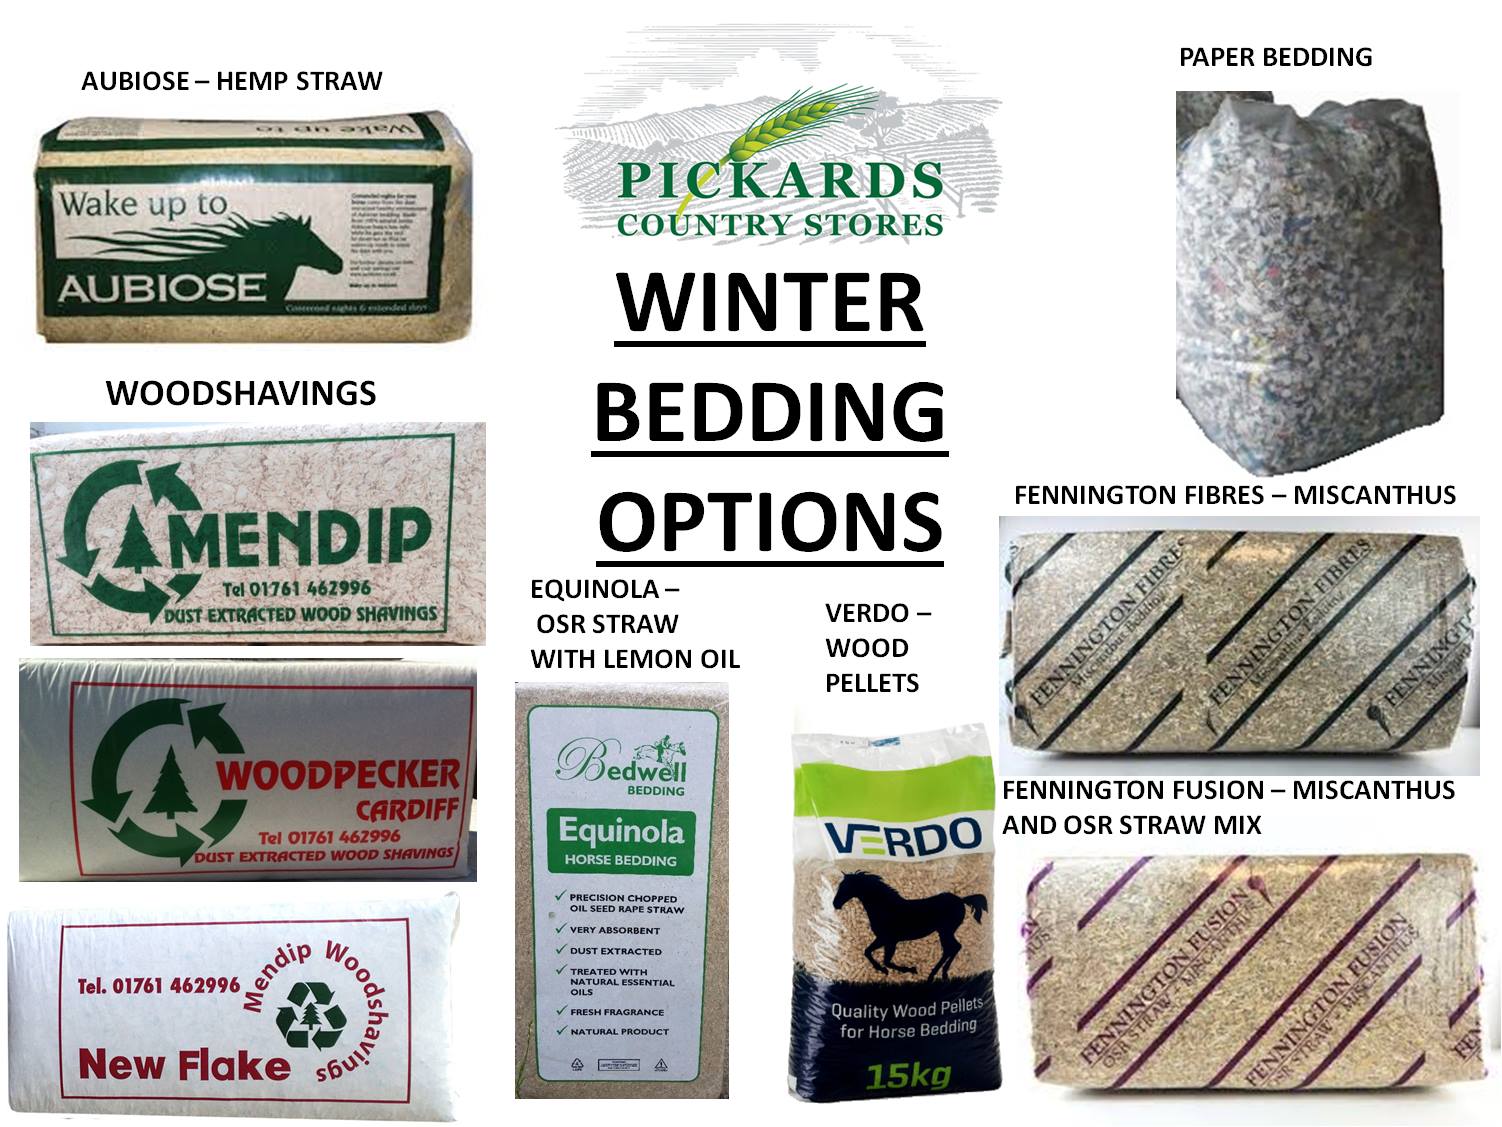 pickards country stores offers a variety of bedding options for horses